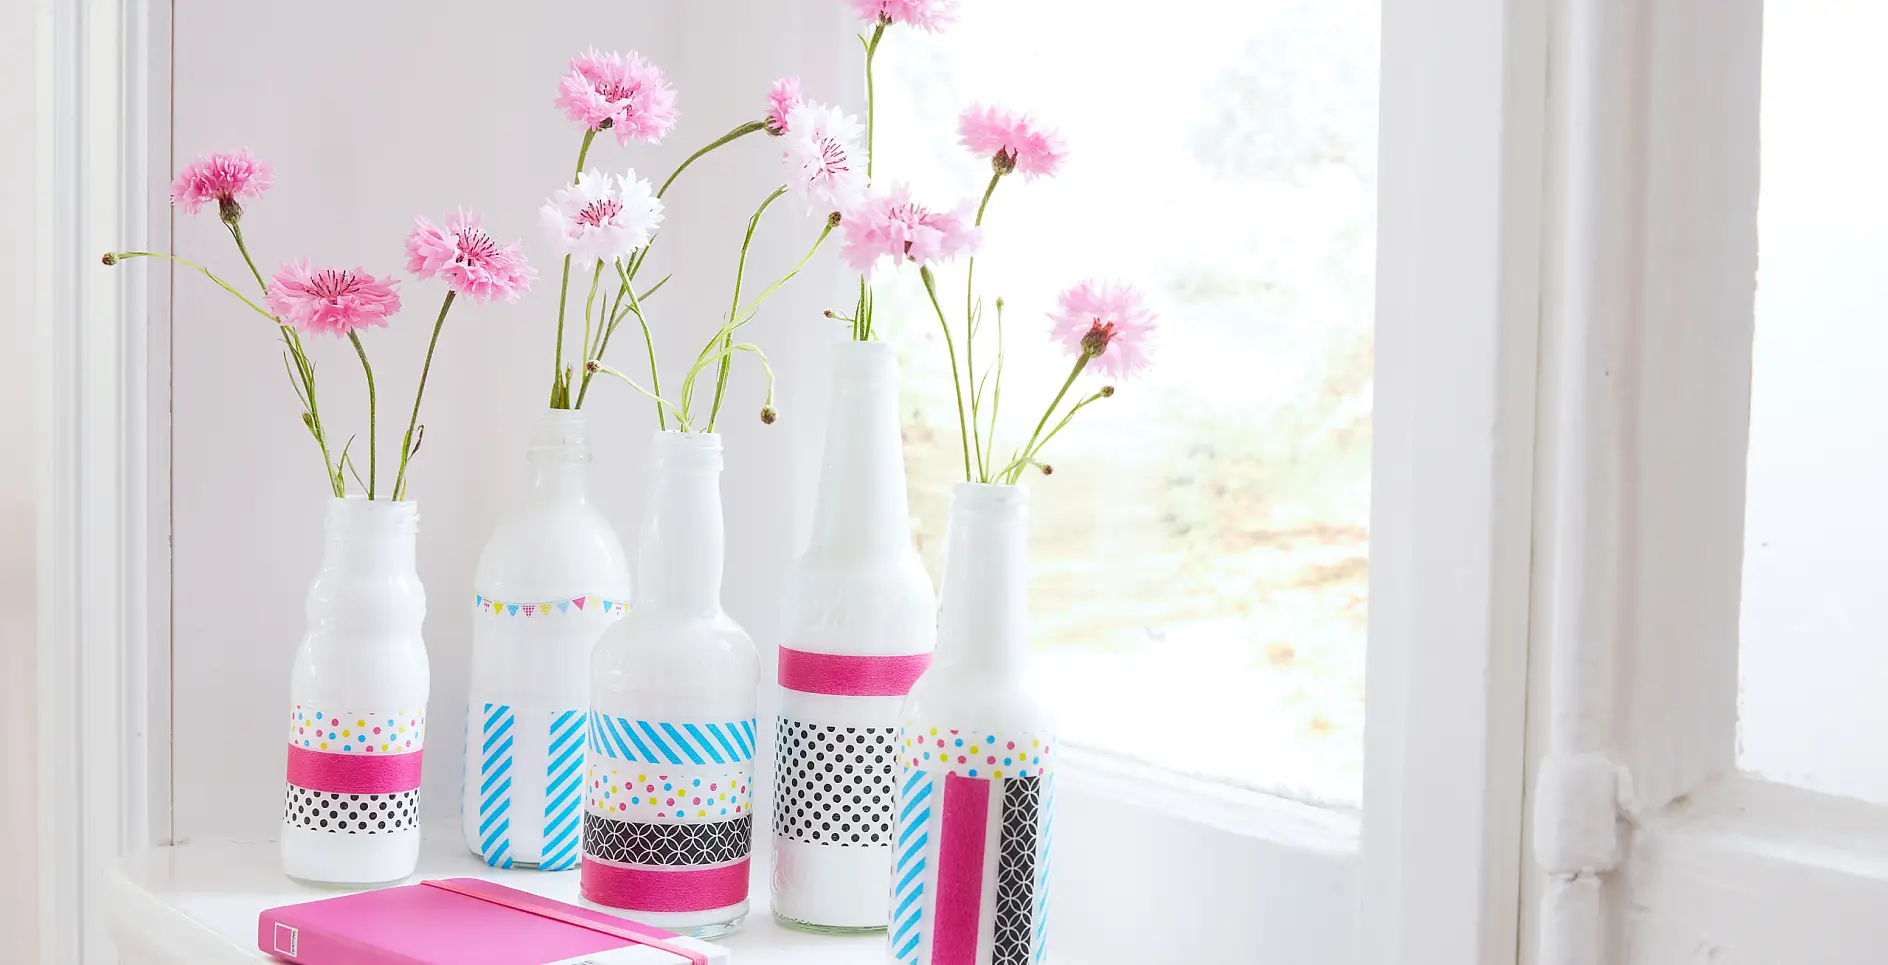 As easy as it gets! Simply whiten beautiful, old glass bottles, then just use your imagination and decorate them with tesa® Deco Tape. If you get tired of the design, simply remove the tape from the bottles, and start all over again!